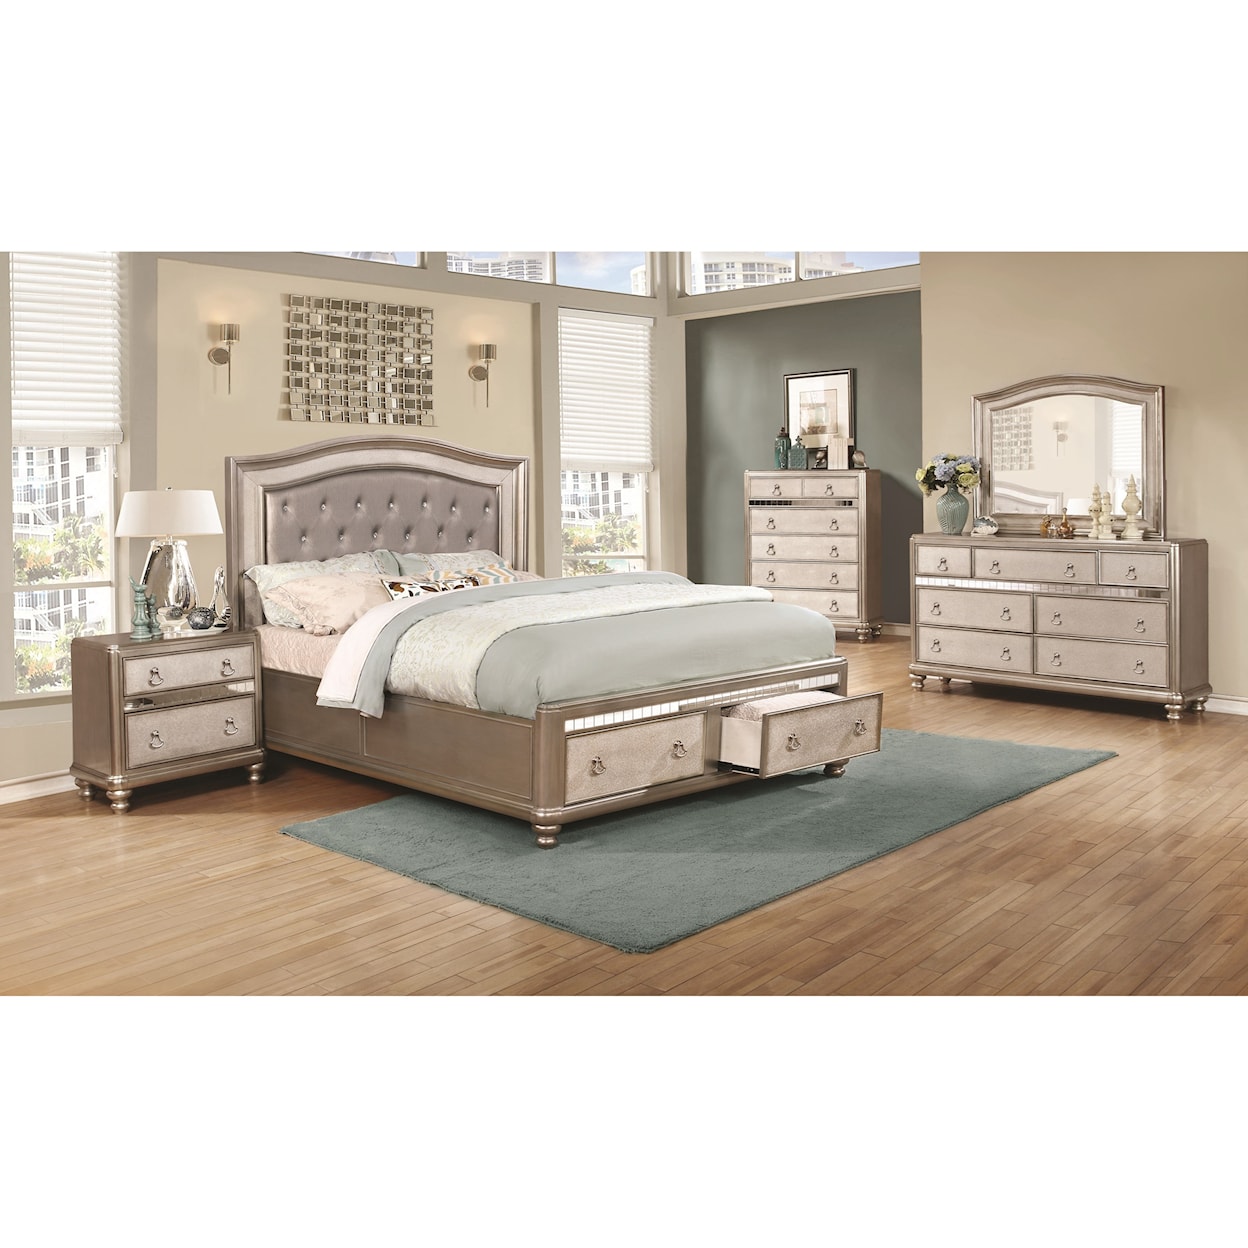 Coaster Bling Game Upholstered Queen Bed